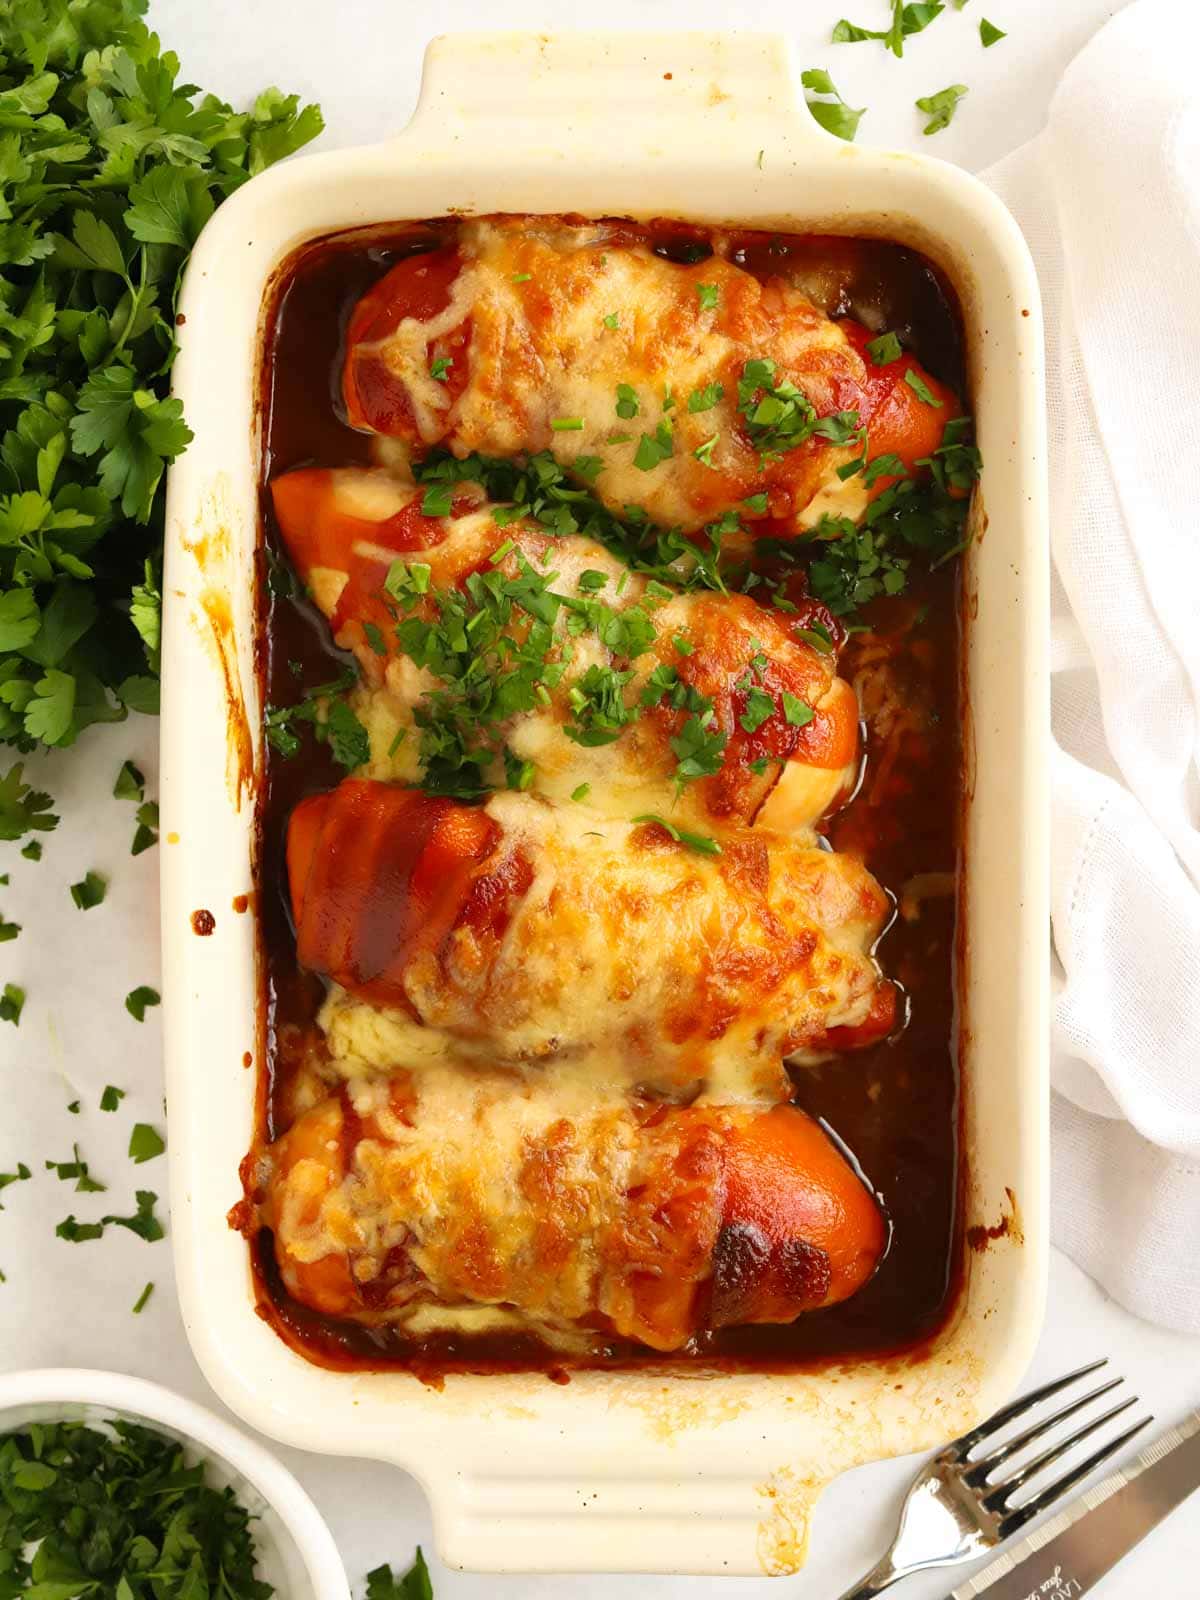 Casserole dish out of the oven with delicious and easy Hunter's Chicken recipe.